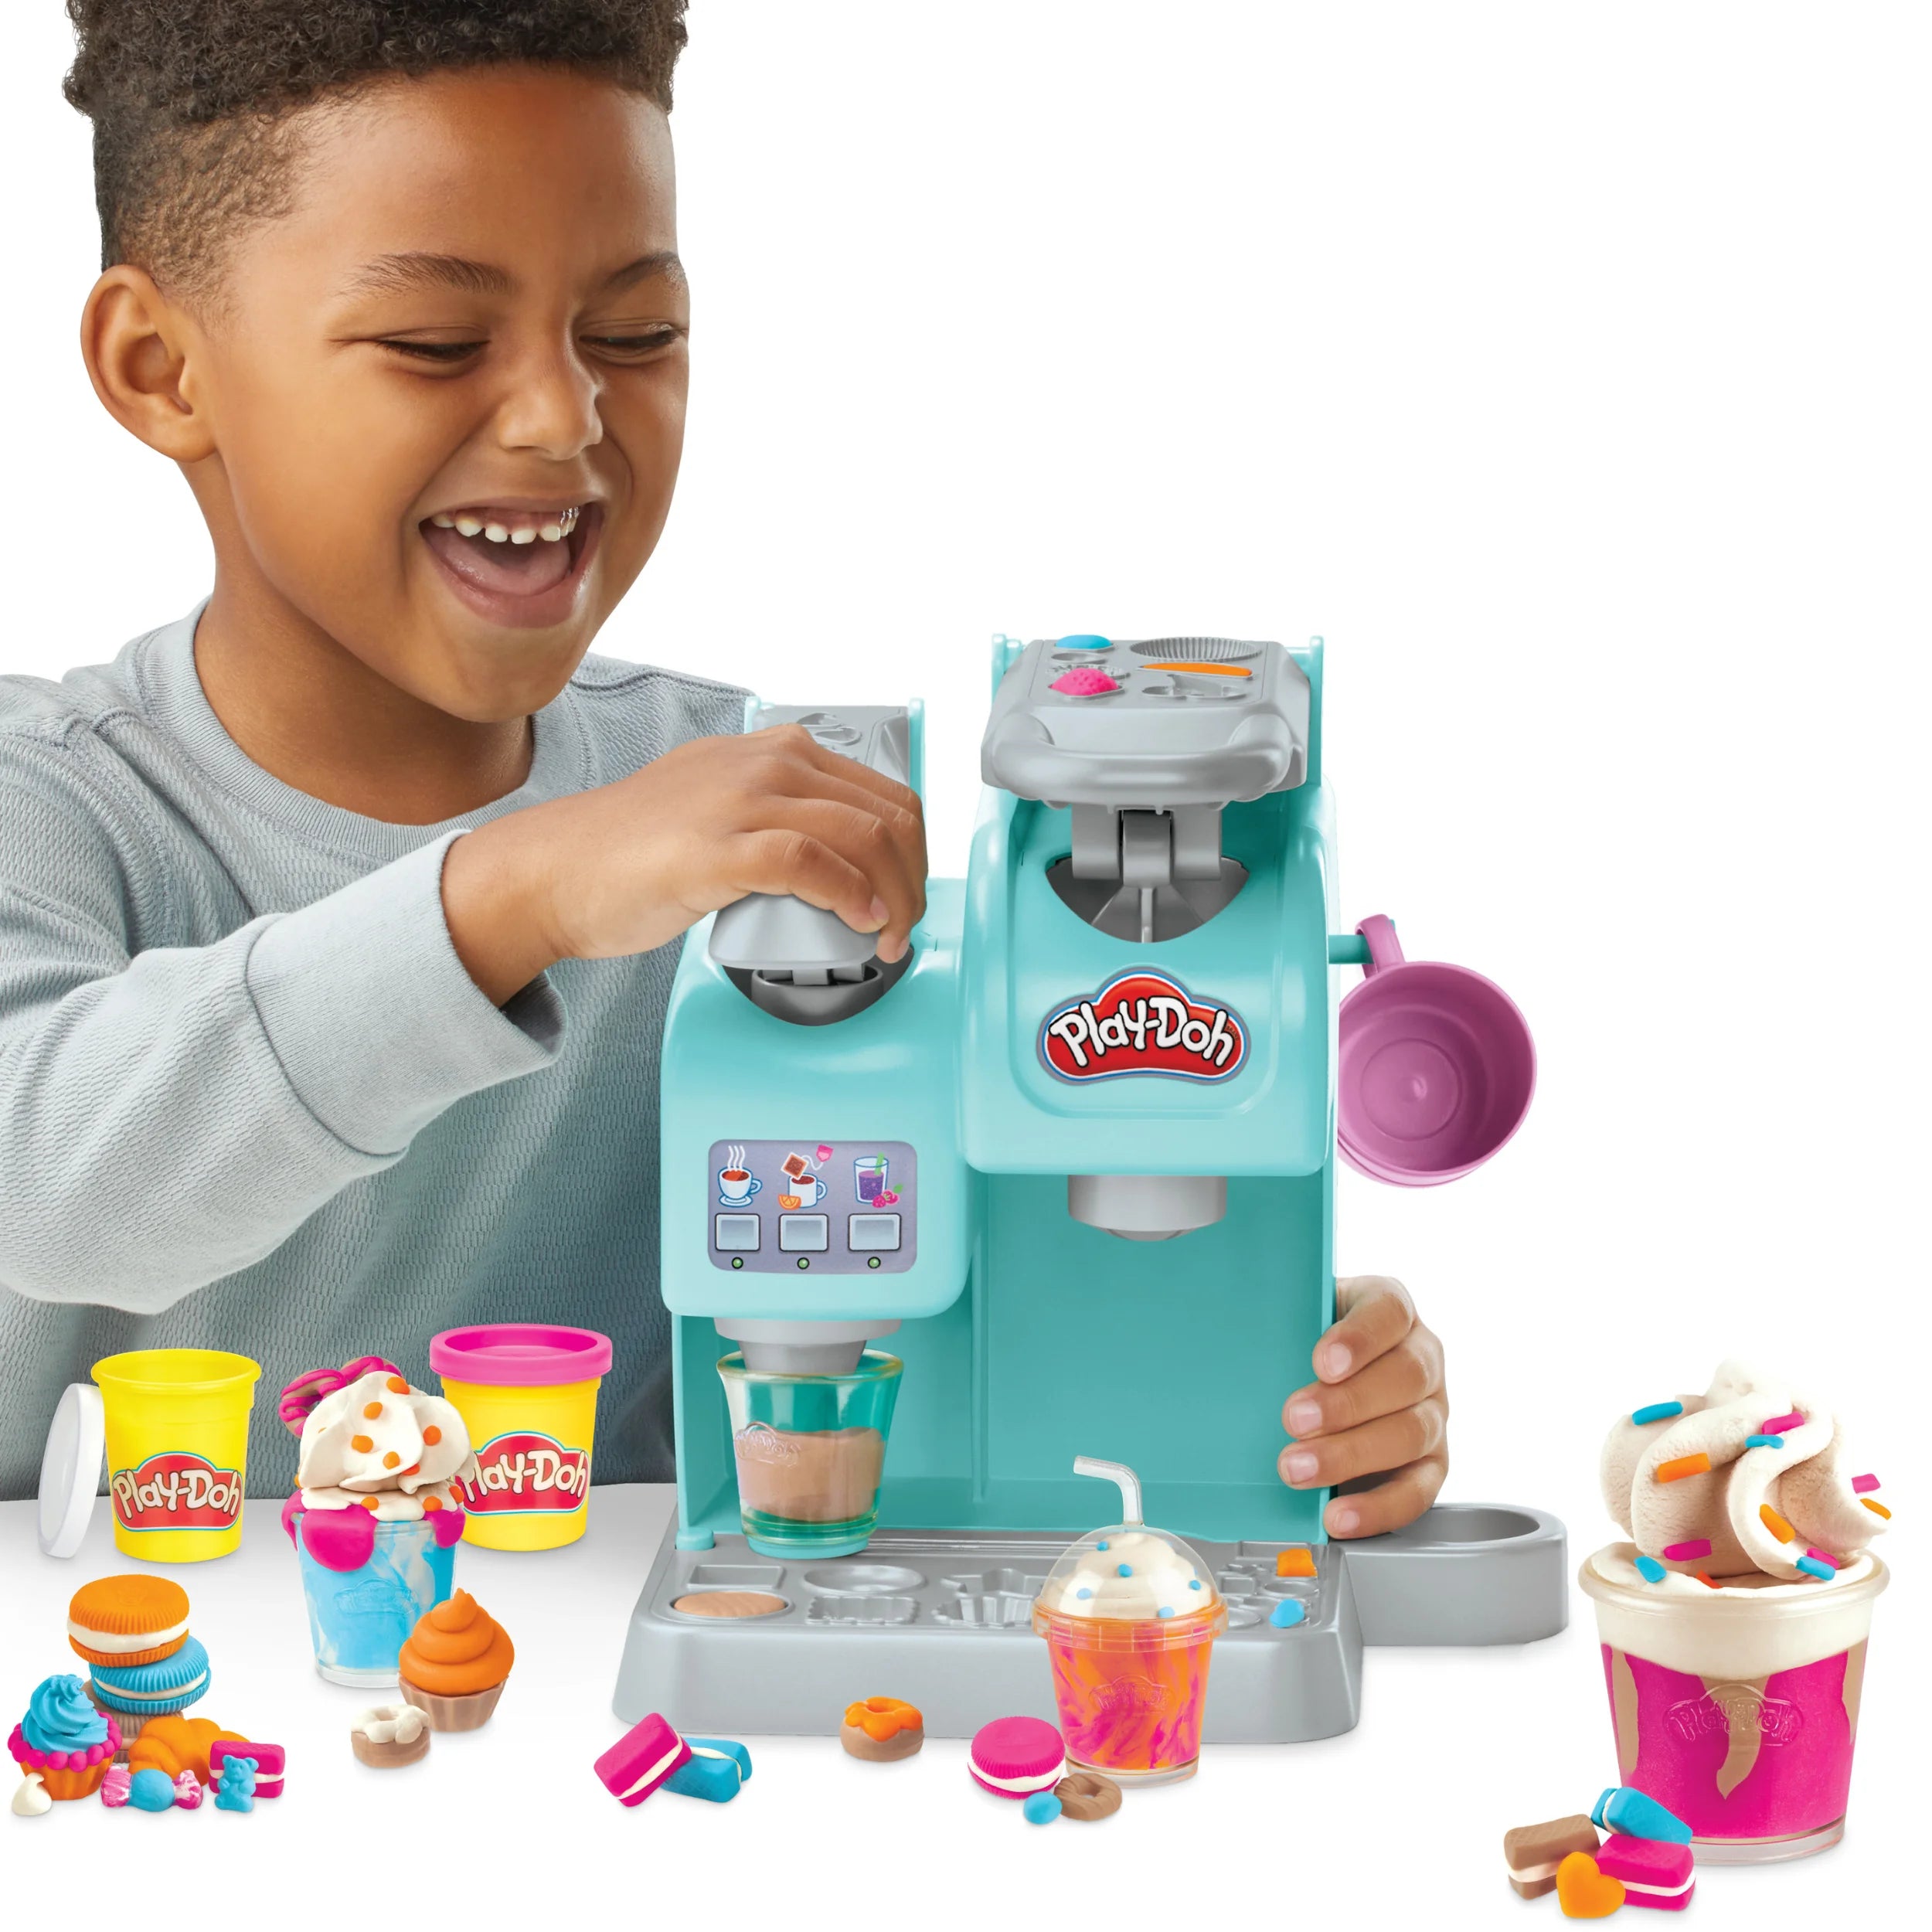 Play-Doh Kitchen Creations Colorful Cafe Play Dough Set - 5 Color